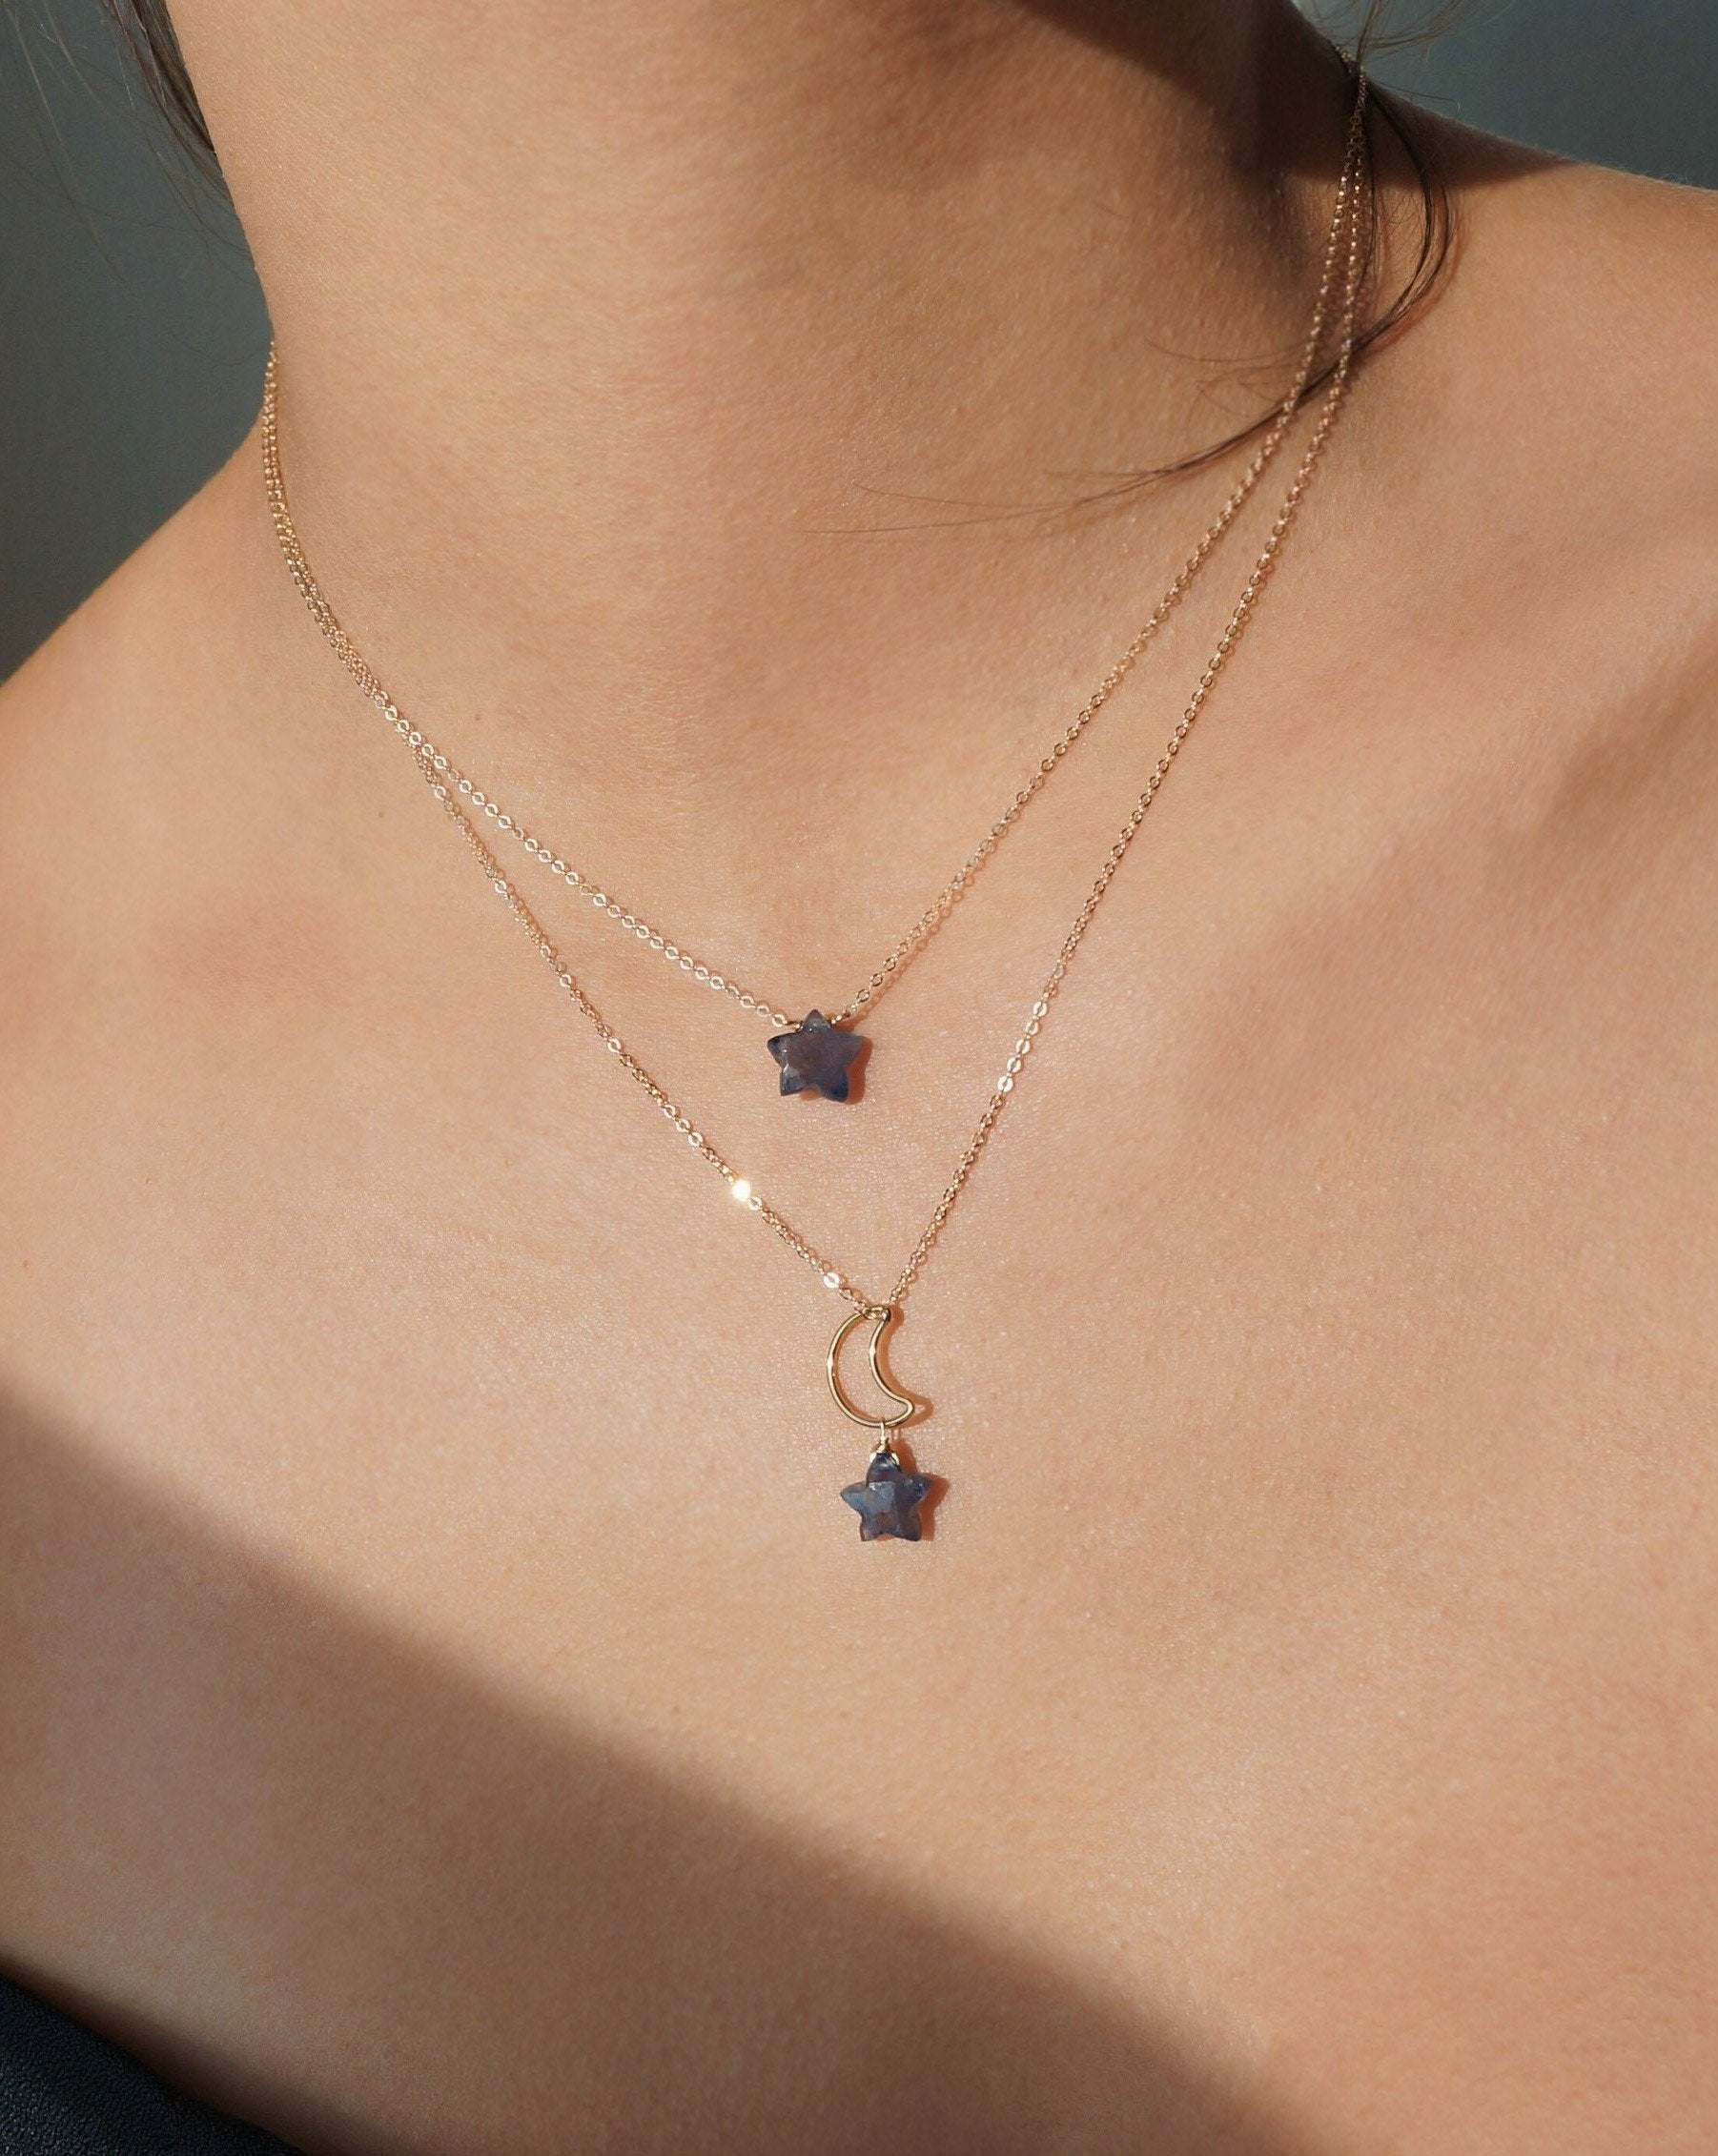 Star Necklace by KOZAKH. A 16 to 18 inch adjustable length necklace, crafted in 14K Gold Filled, featuring an Iolite star charm.